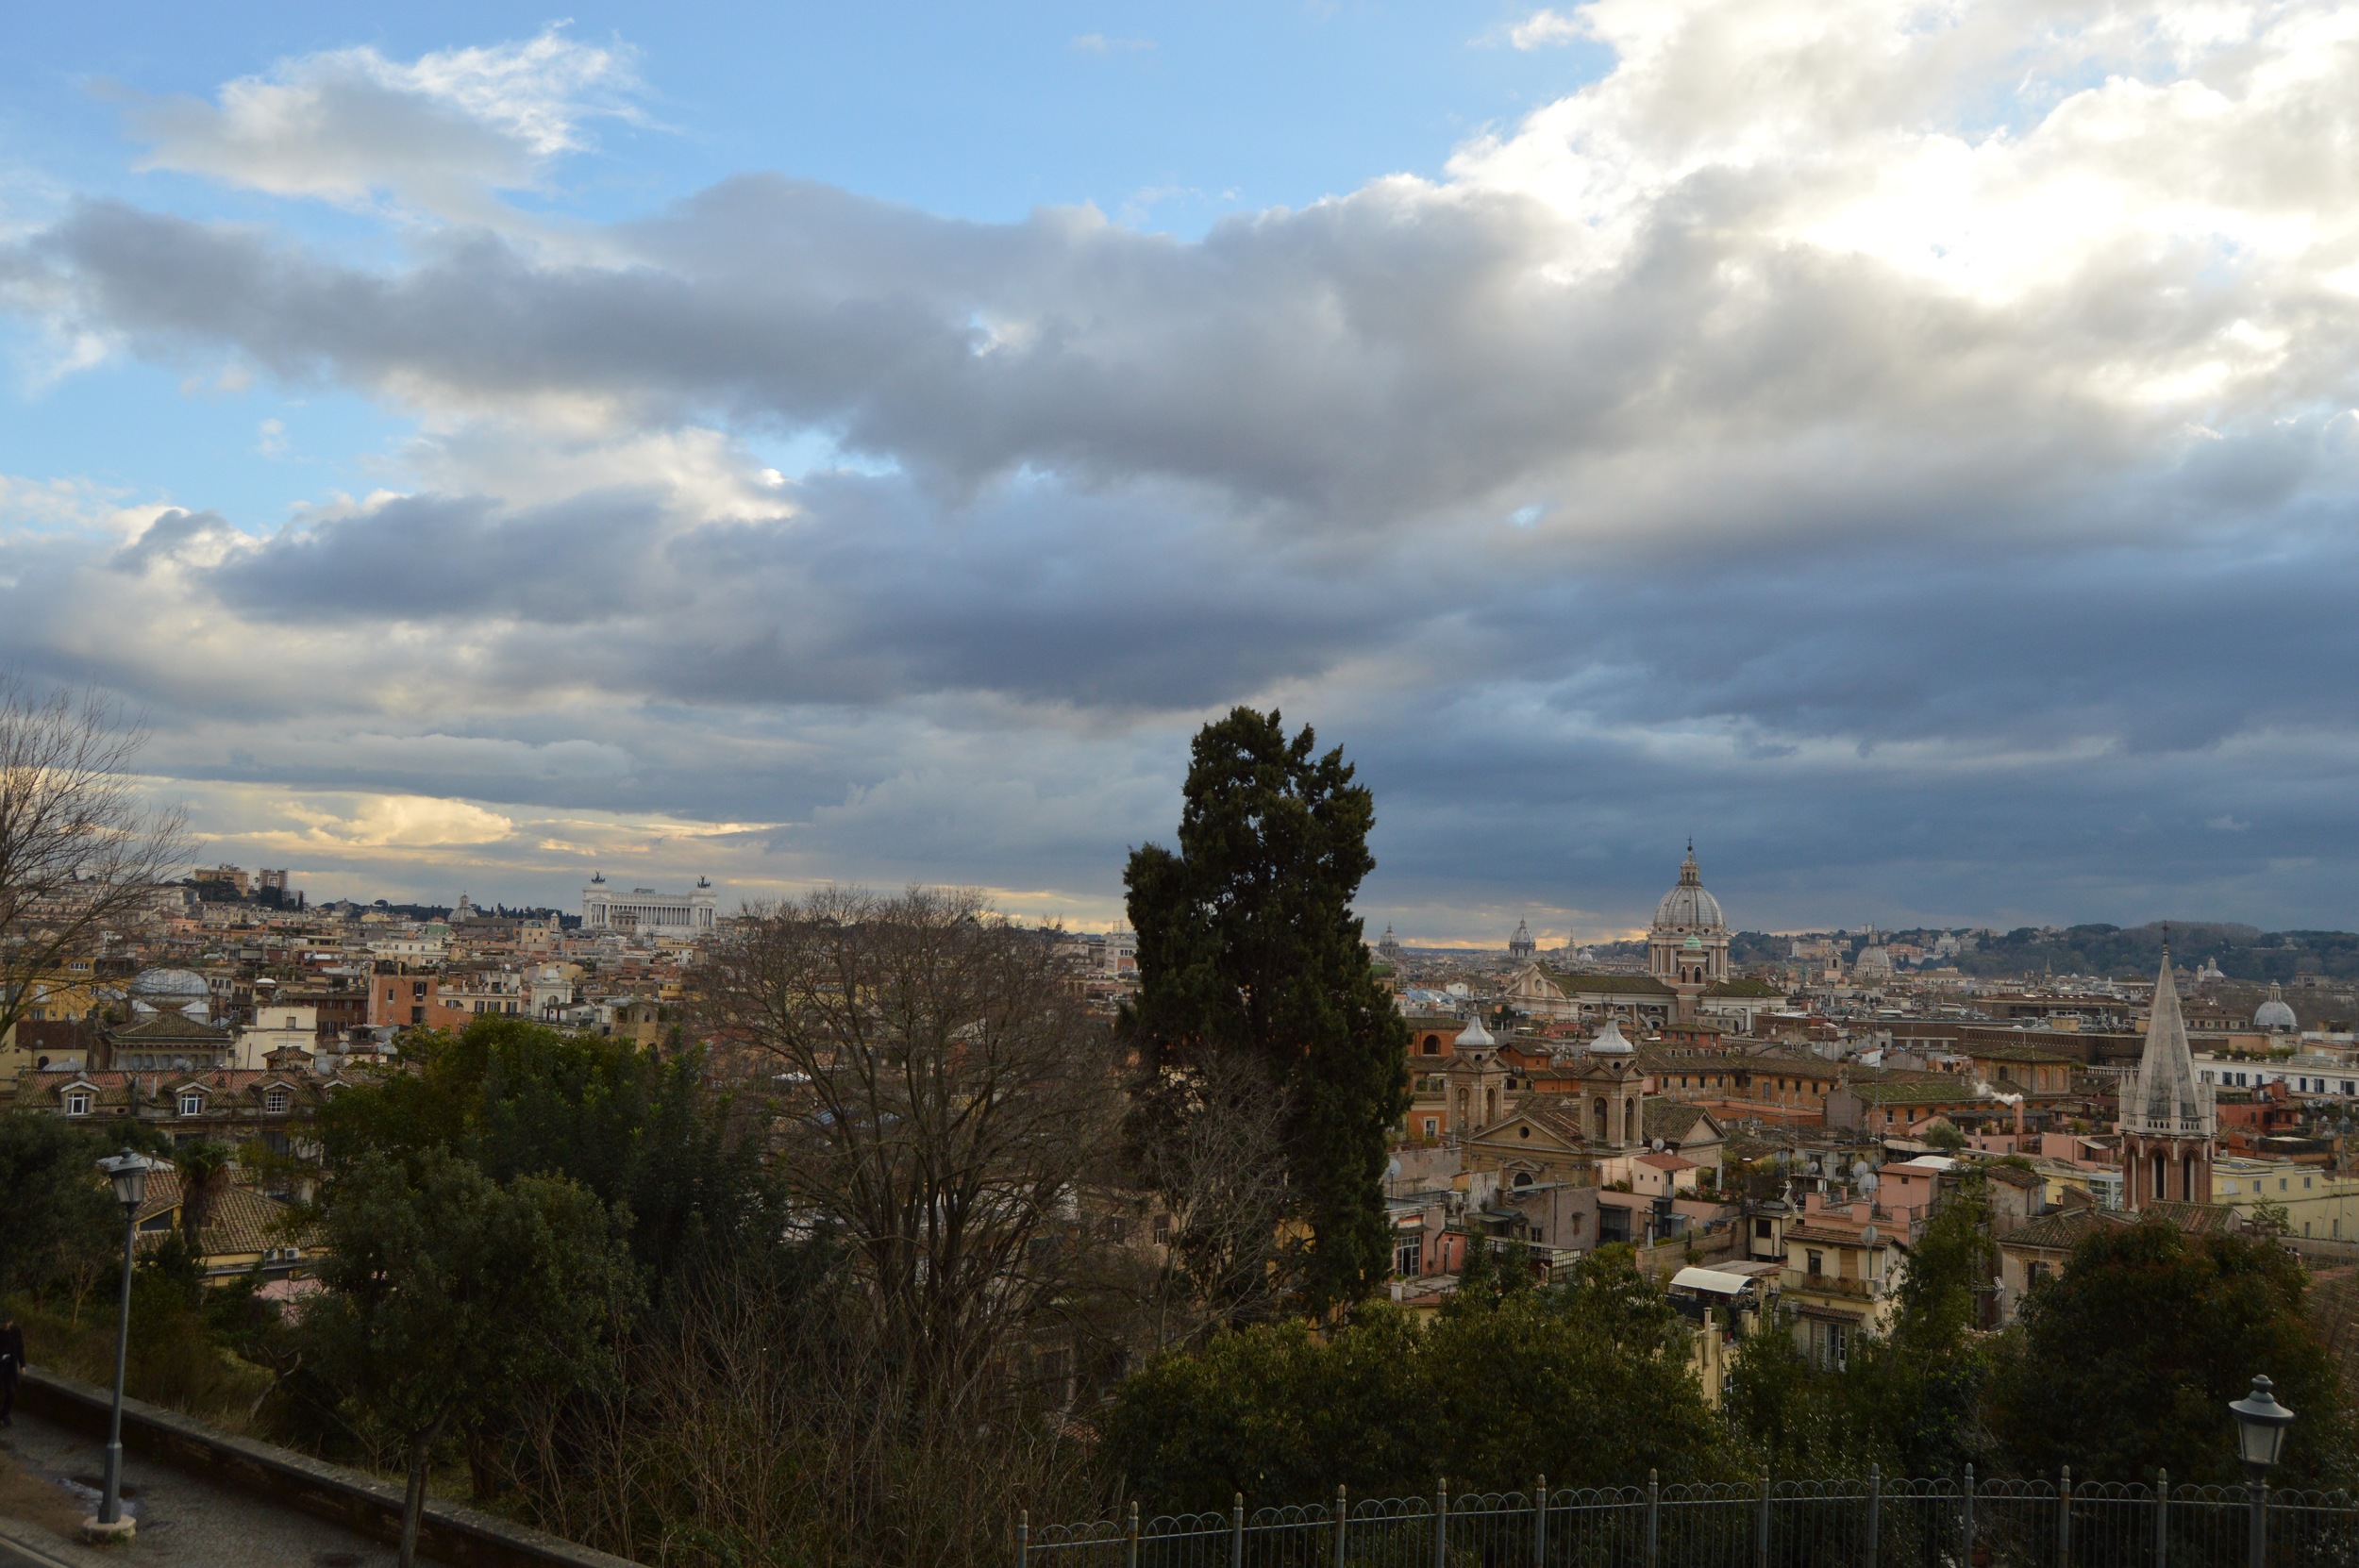   Wide view from Villa Borghese, up past the top of the Spanish steps. The best (and my favorite) view of Rome that I got all weekend. Photo by Max Siskind.  